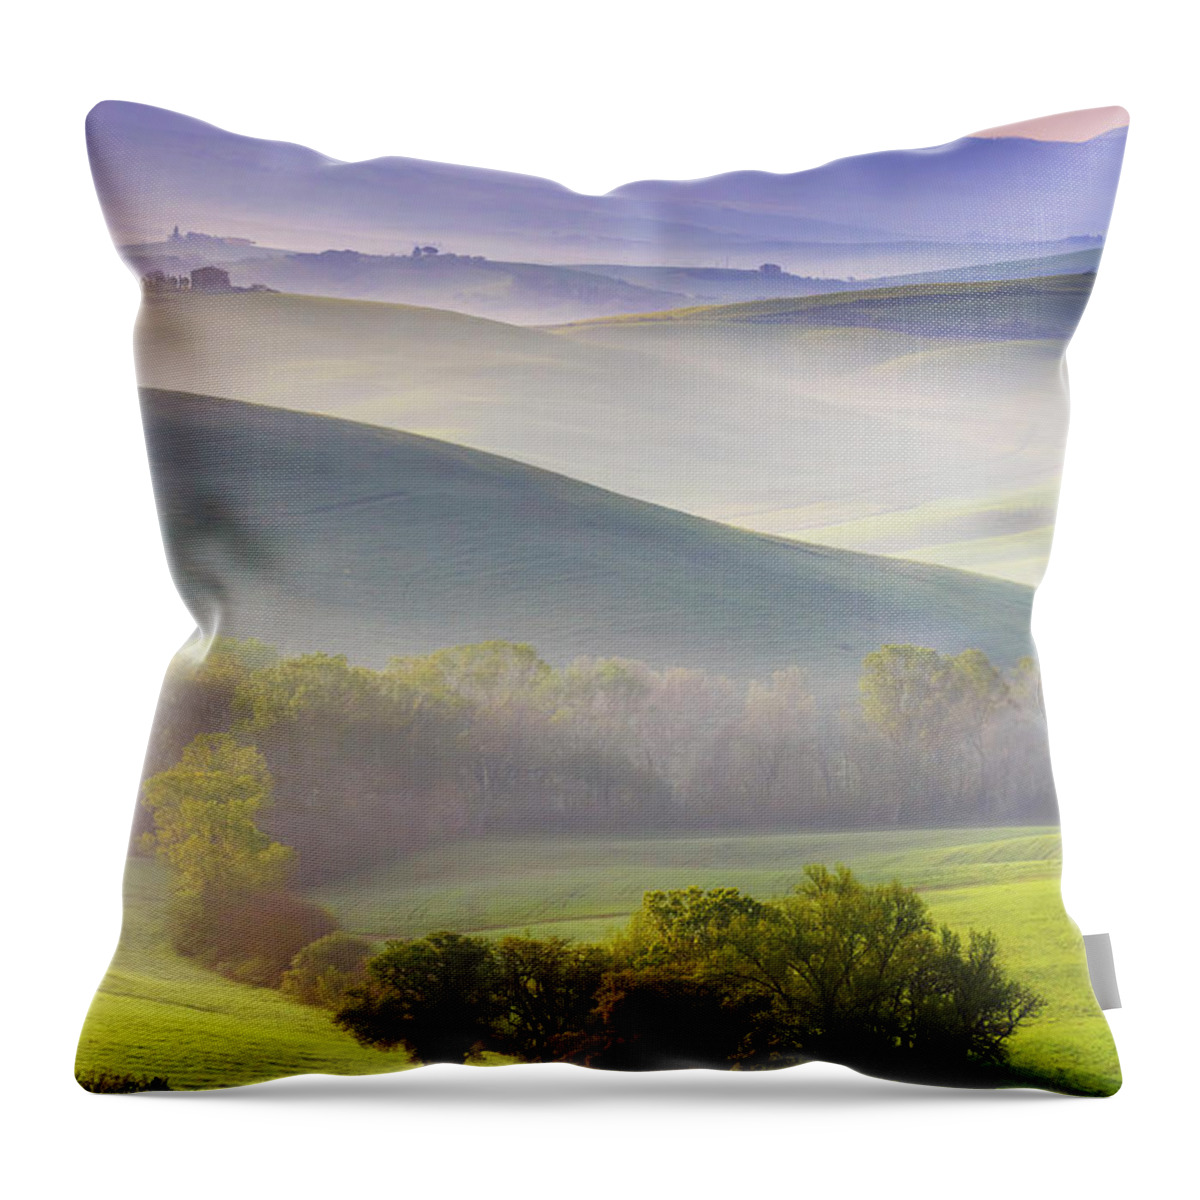 Estock Throw Pillow featuring the digital art Tuscany, Awesome Landscape At Dawn #2 by Maurizio Rellini